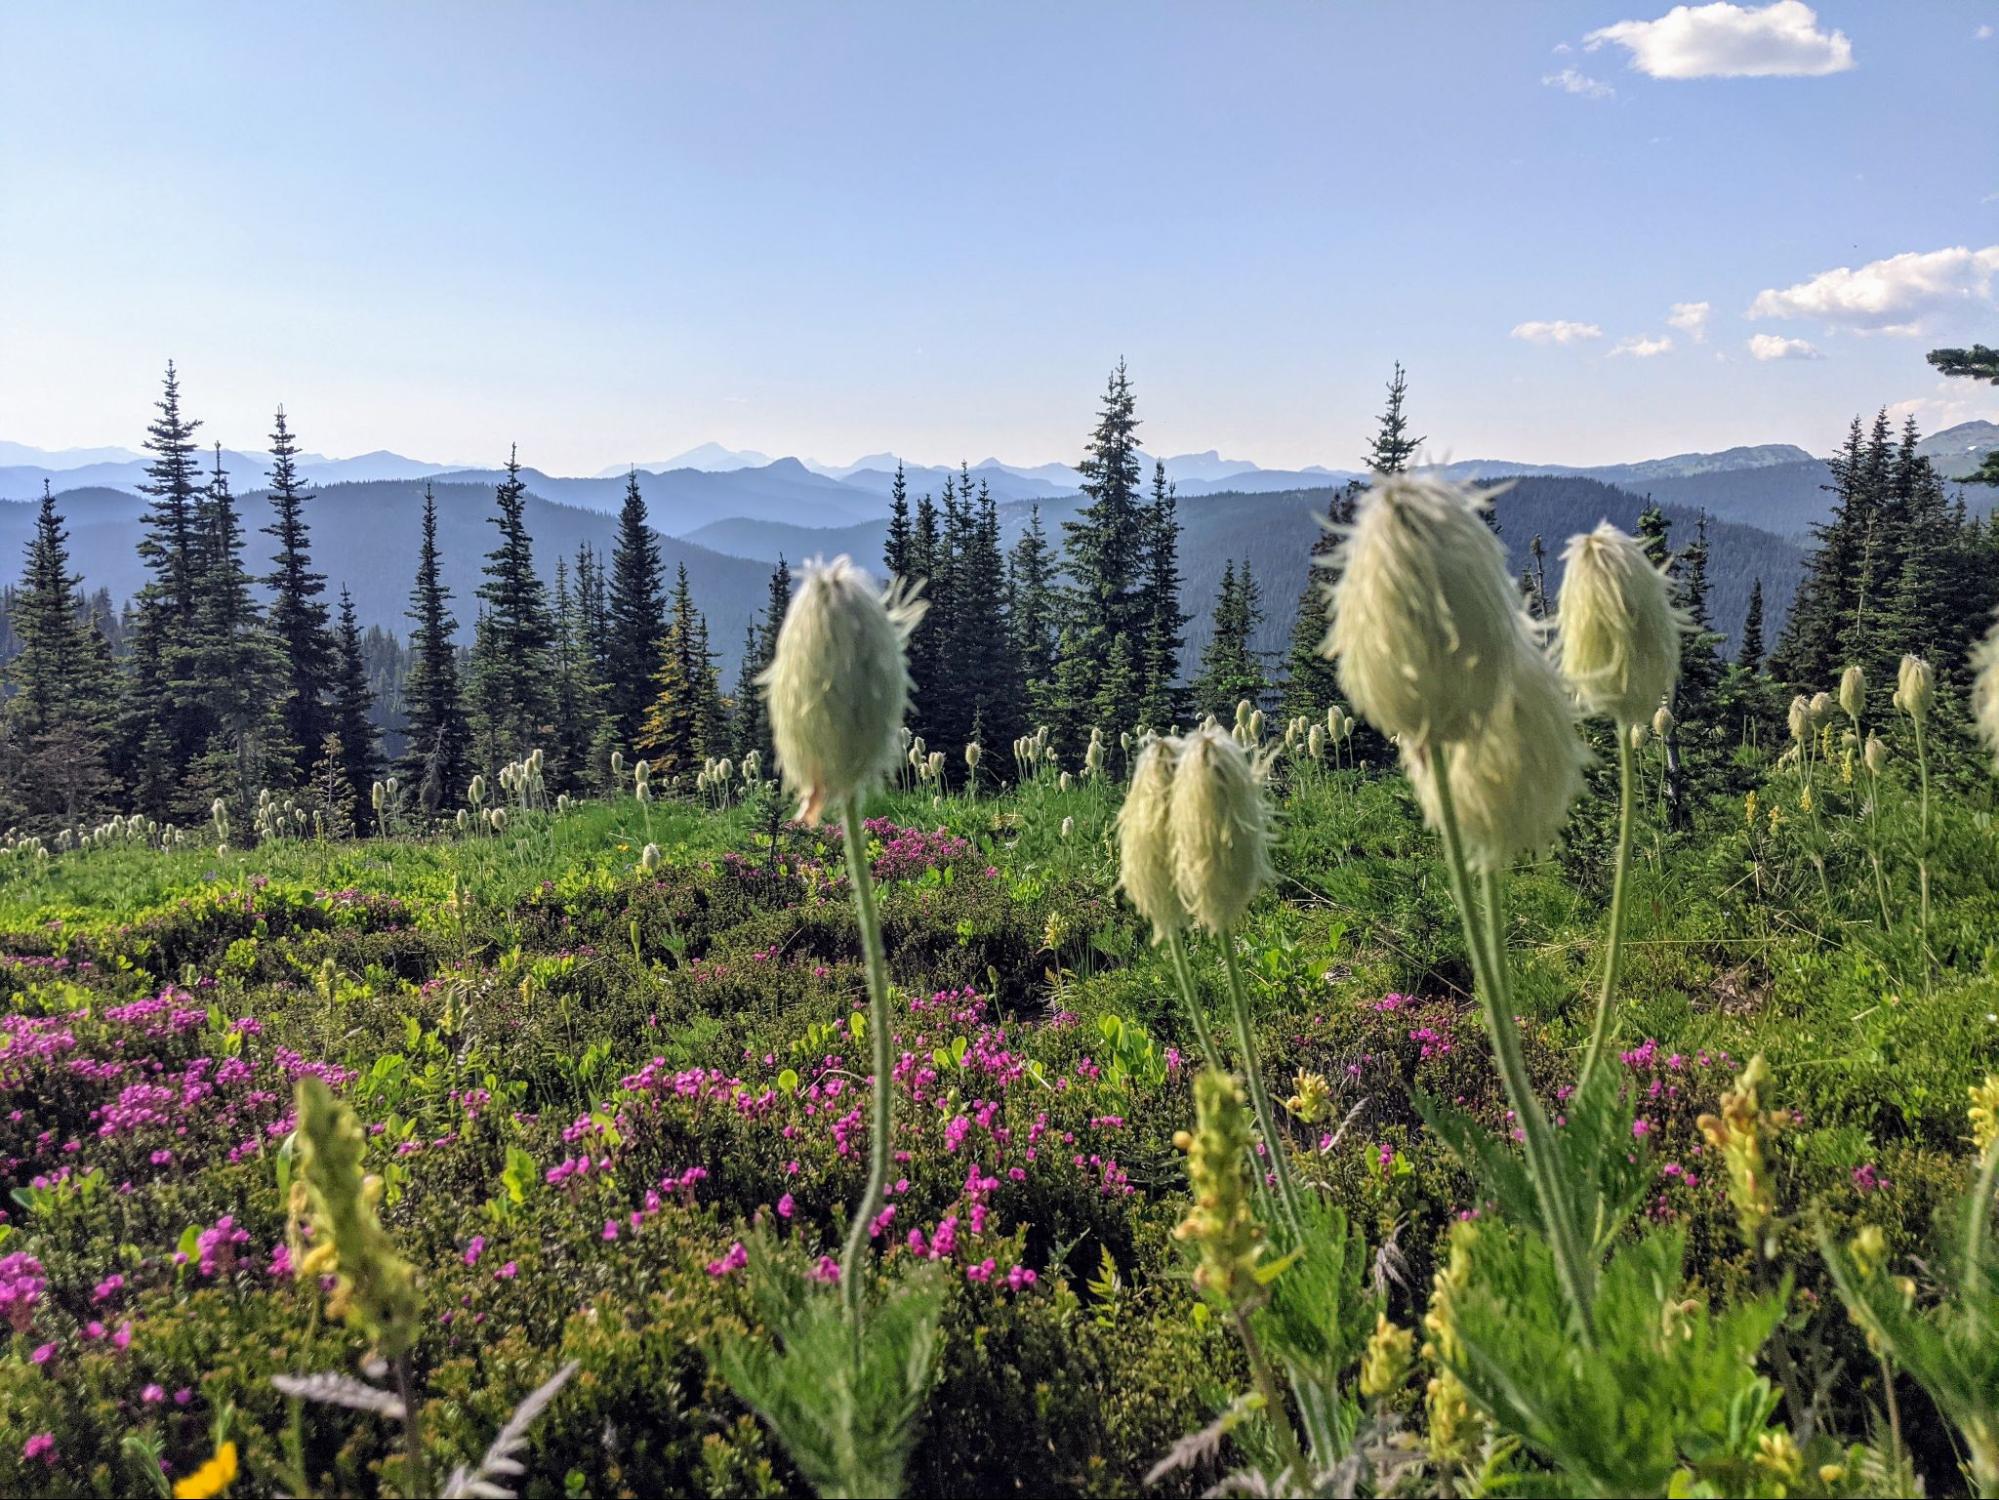 Wildflowers in the alpine meadows at Manning Park, British Columbia. The Cascade mountains can be seen in the background. 